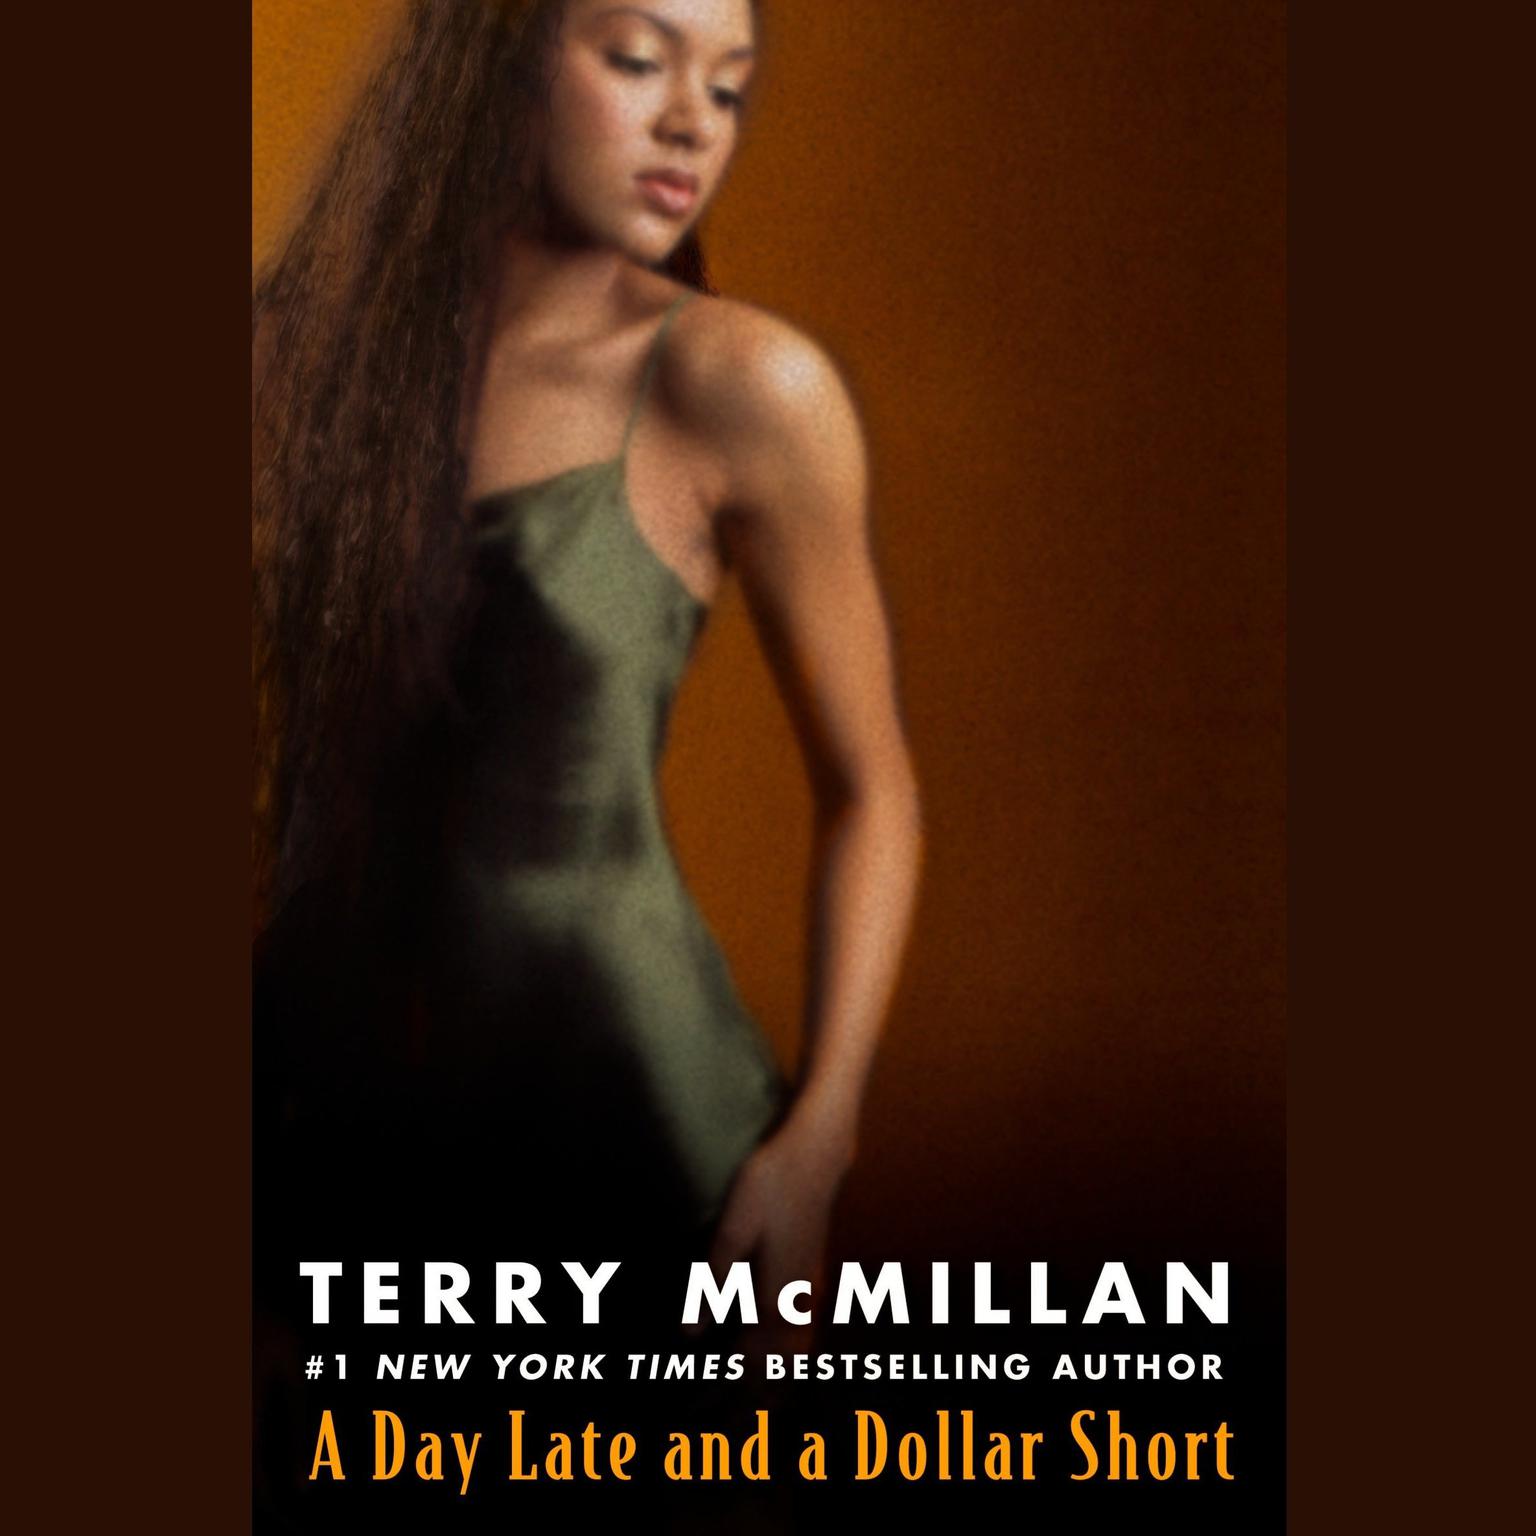 A Day Late and a Dollar Short (Abridged) Audiobook, by Terry McMillan